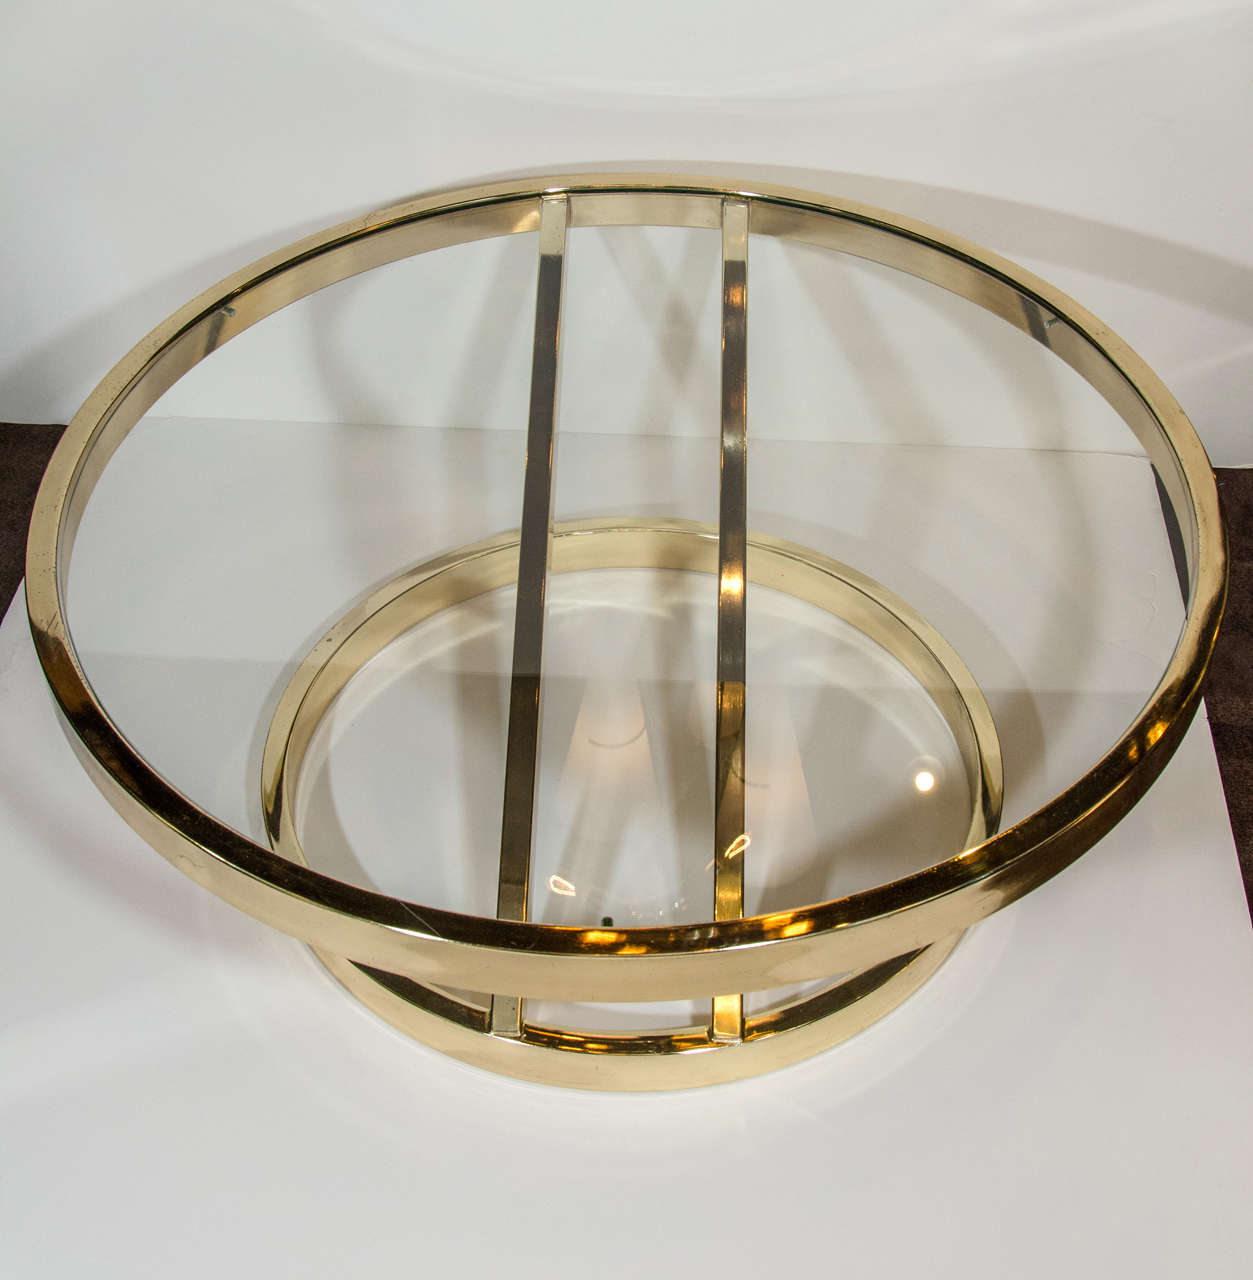 20th Century Circular Brass Coffee Table with Cantilevered Base by Milo Baughman